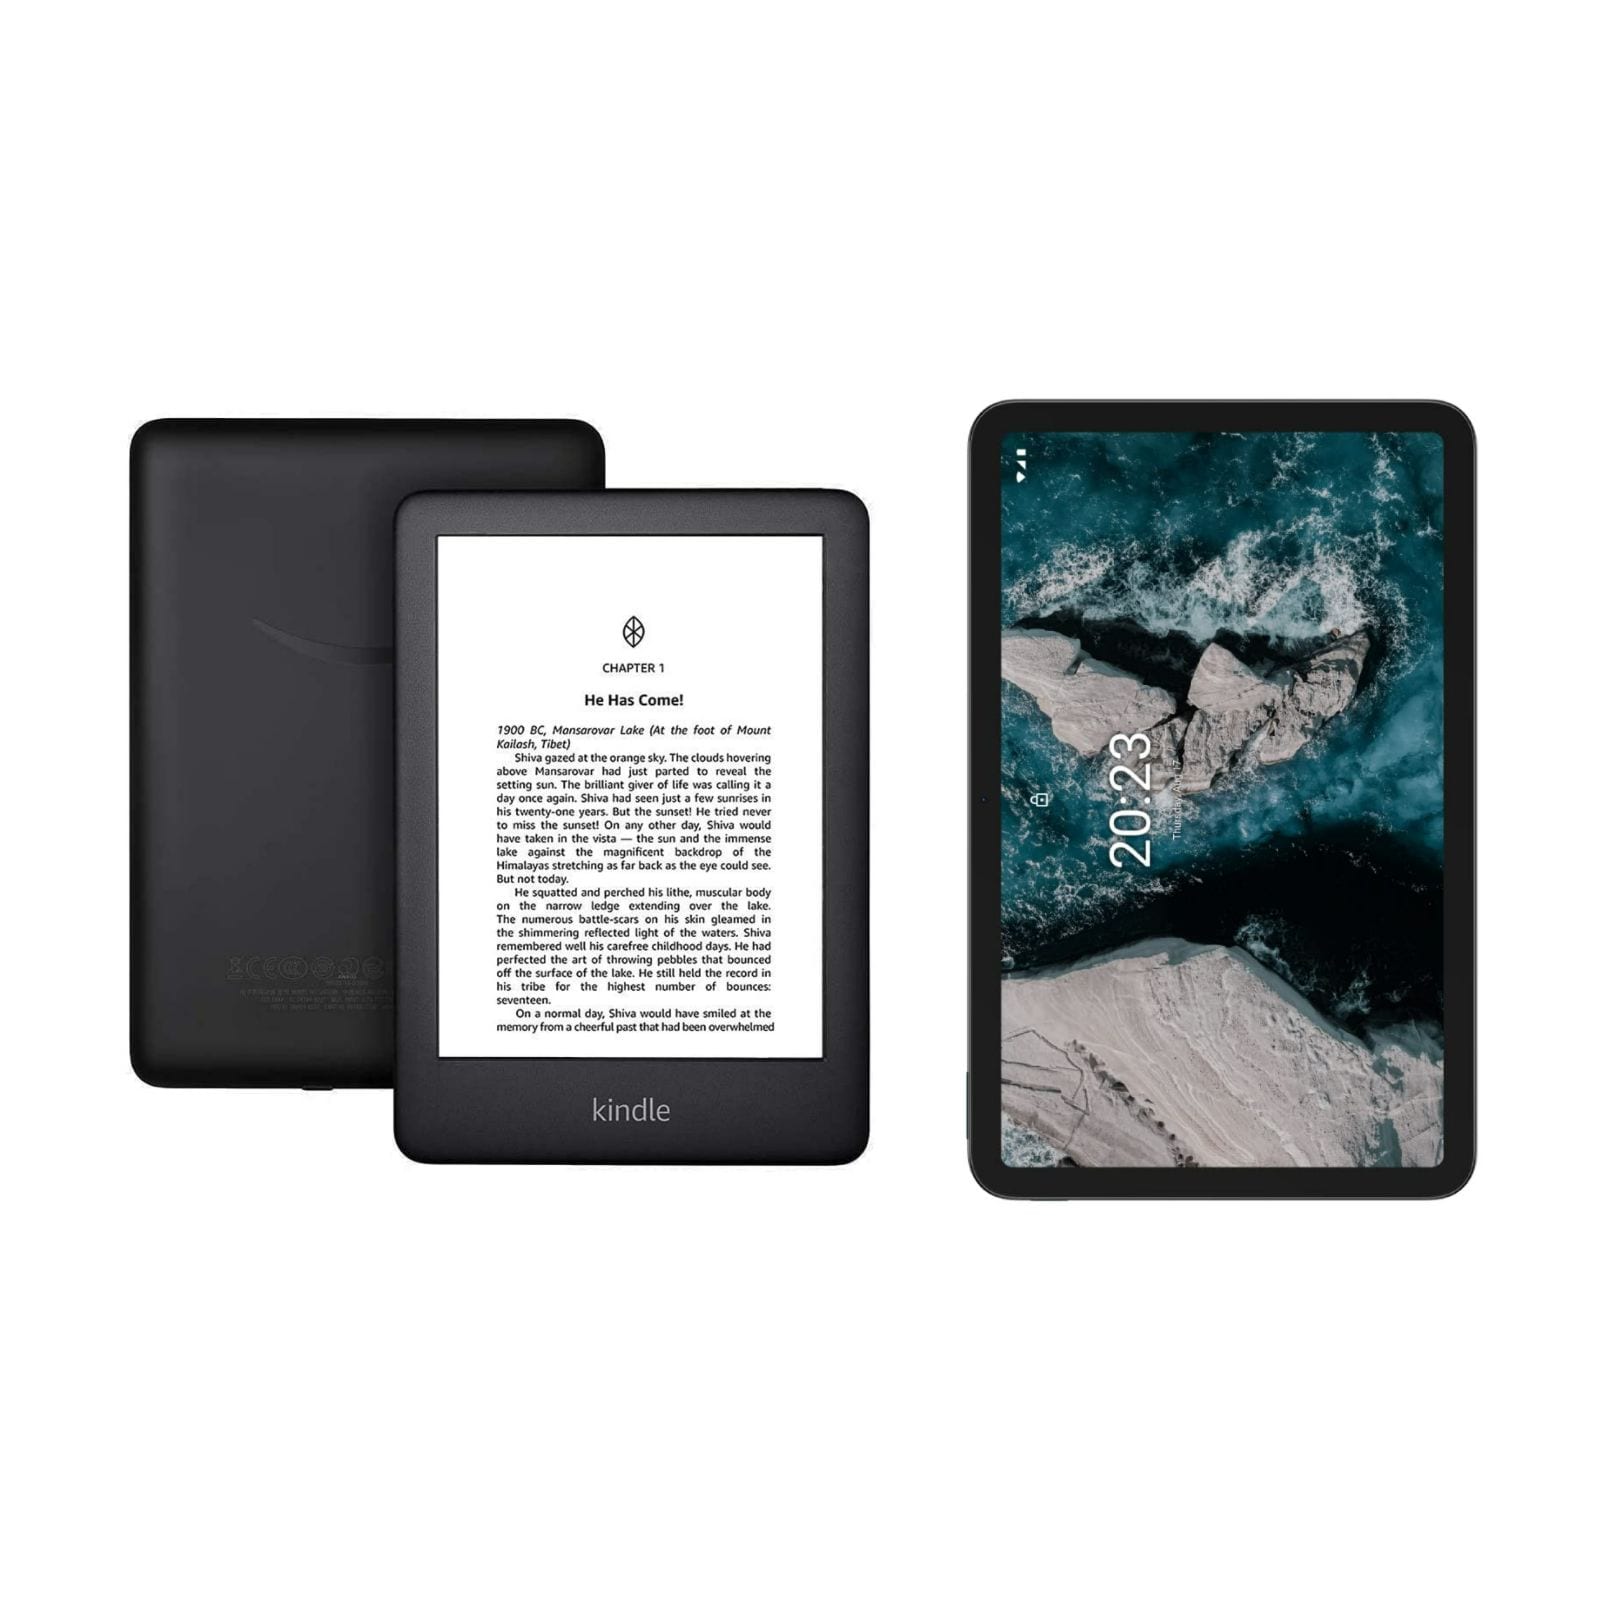 Owners of older Kindles won't be able to buy ebooks on-device soon